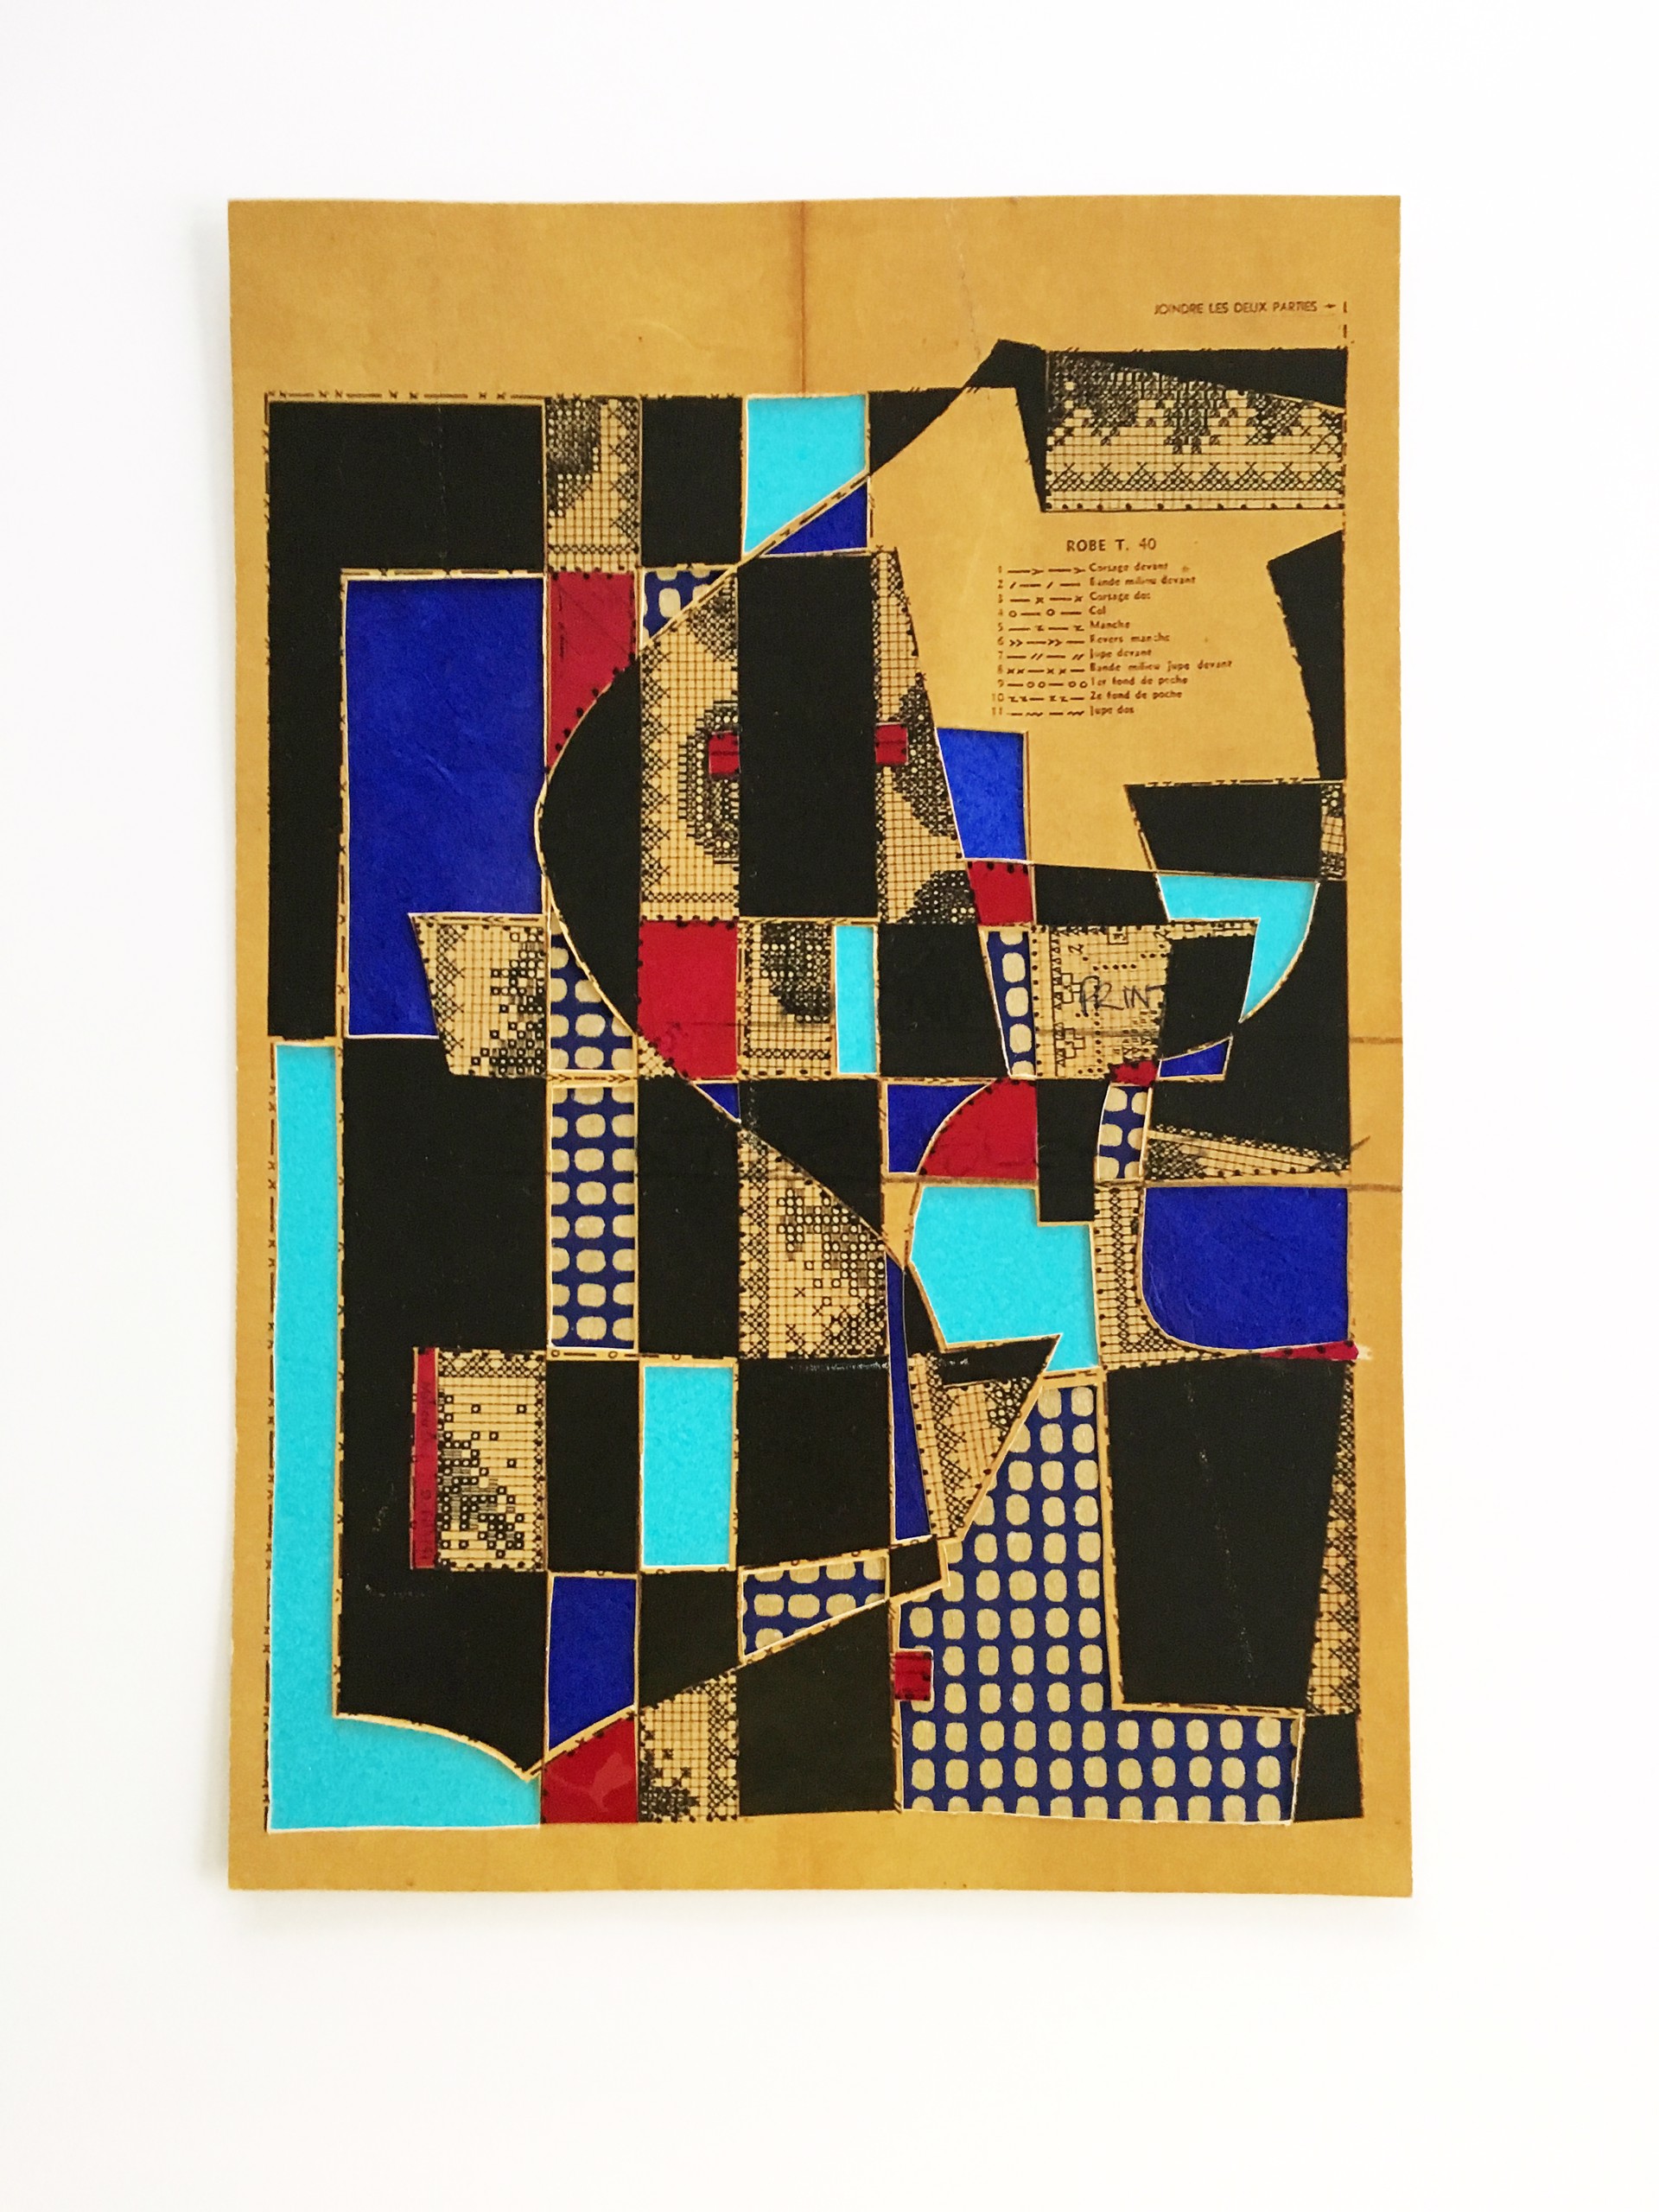 Big Little Collage N°2 by Hormazd Narielwalla